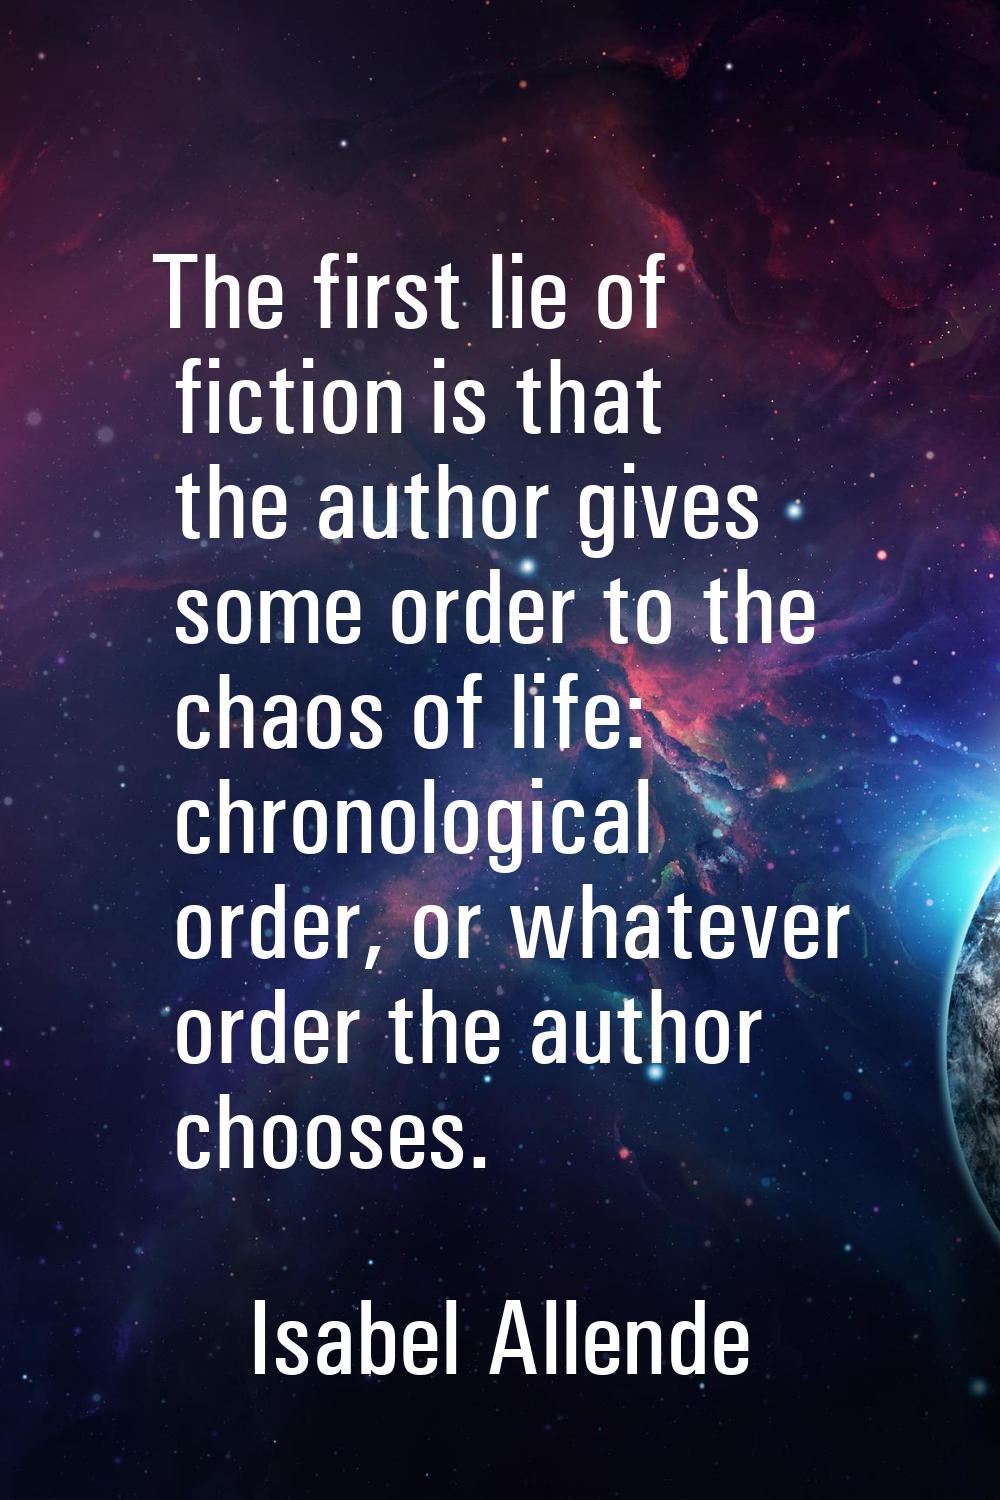 The first lie of fiction is that the author gives some order to the chaos of life: chronological or